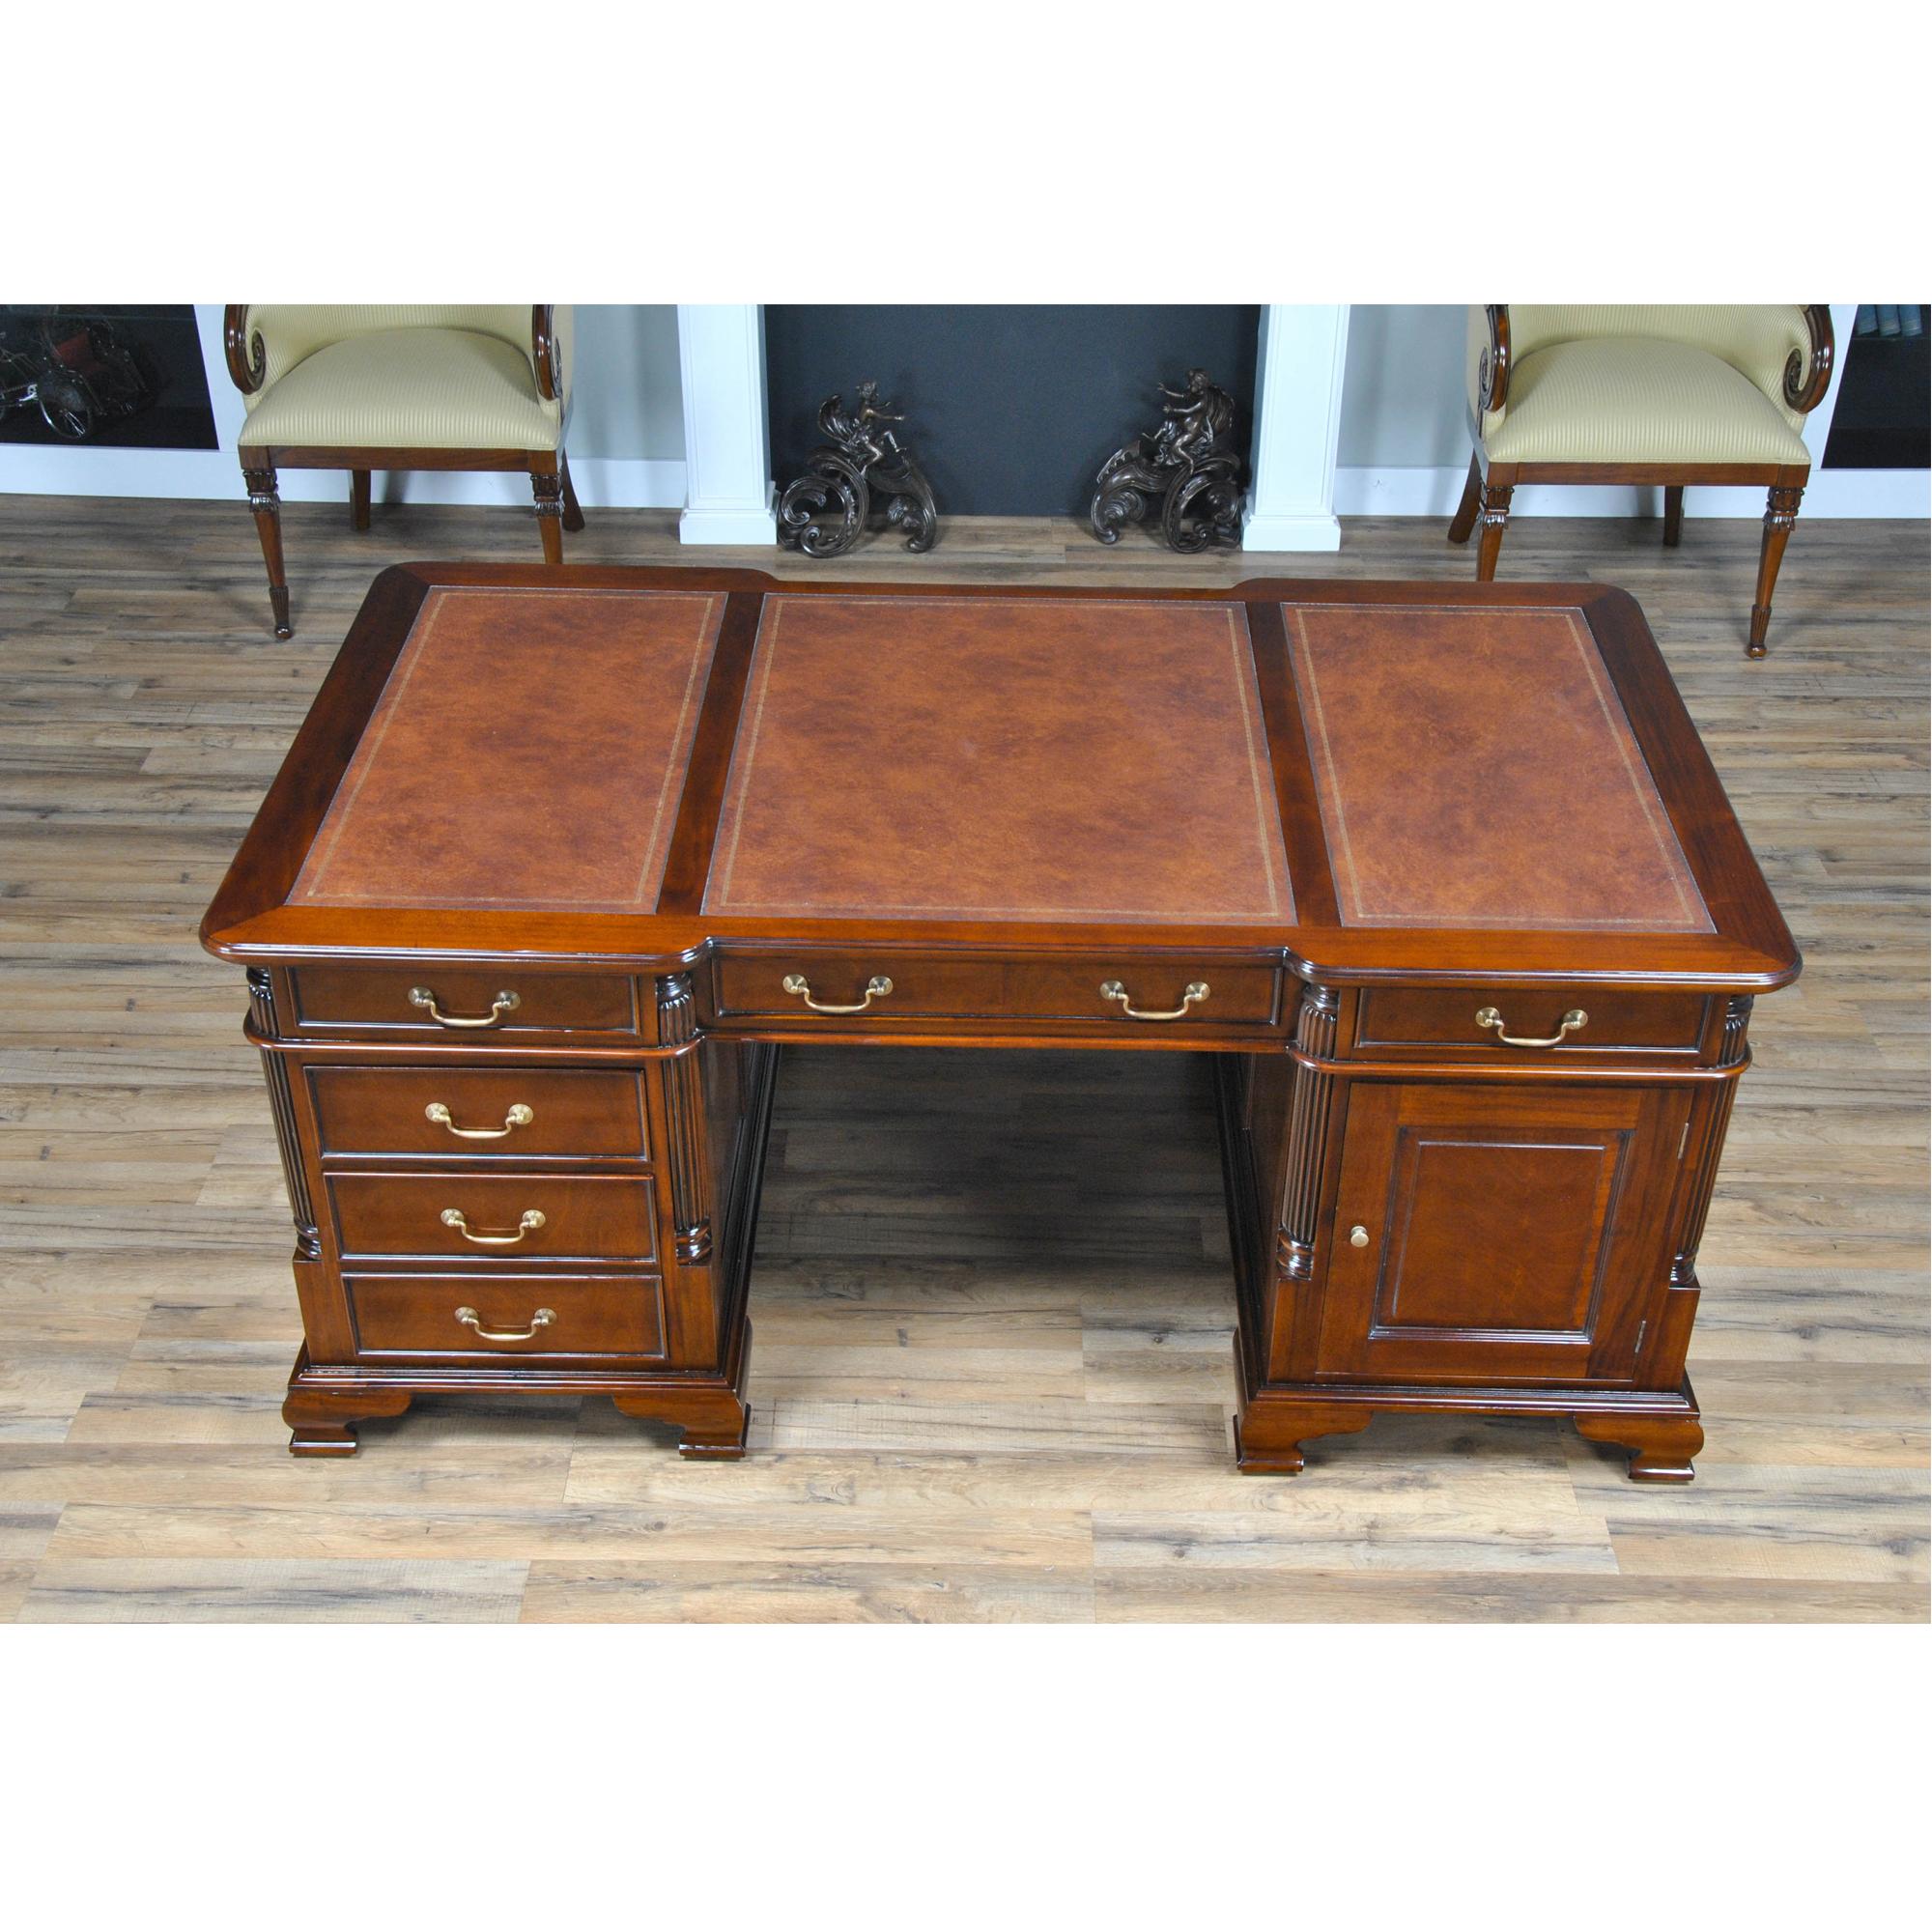 A fine quality Mahogany Partners Desk from Niagara Furniture with raised door panels and a rich brown color finish similar to that found in English antiques. The three-paneled writing surface of brown, full grain genuine leather features antique